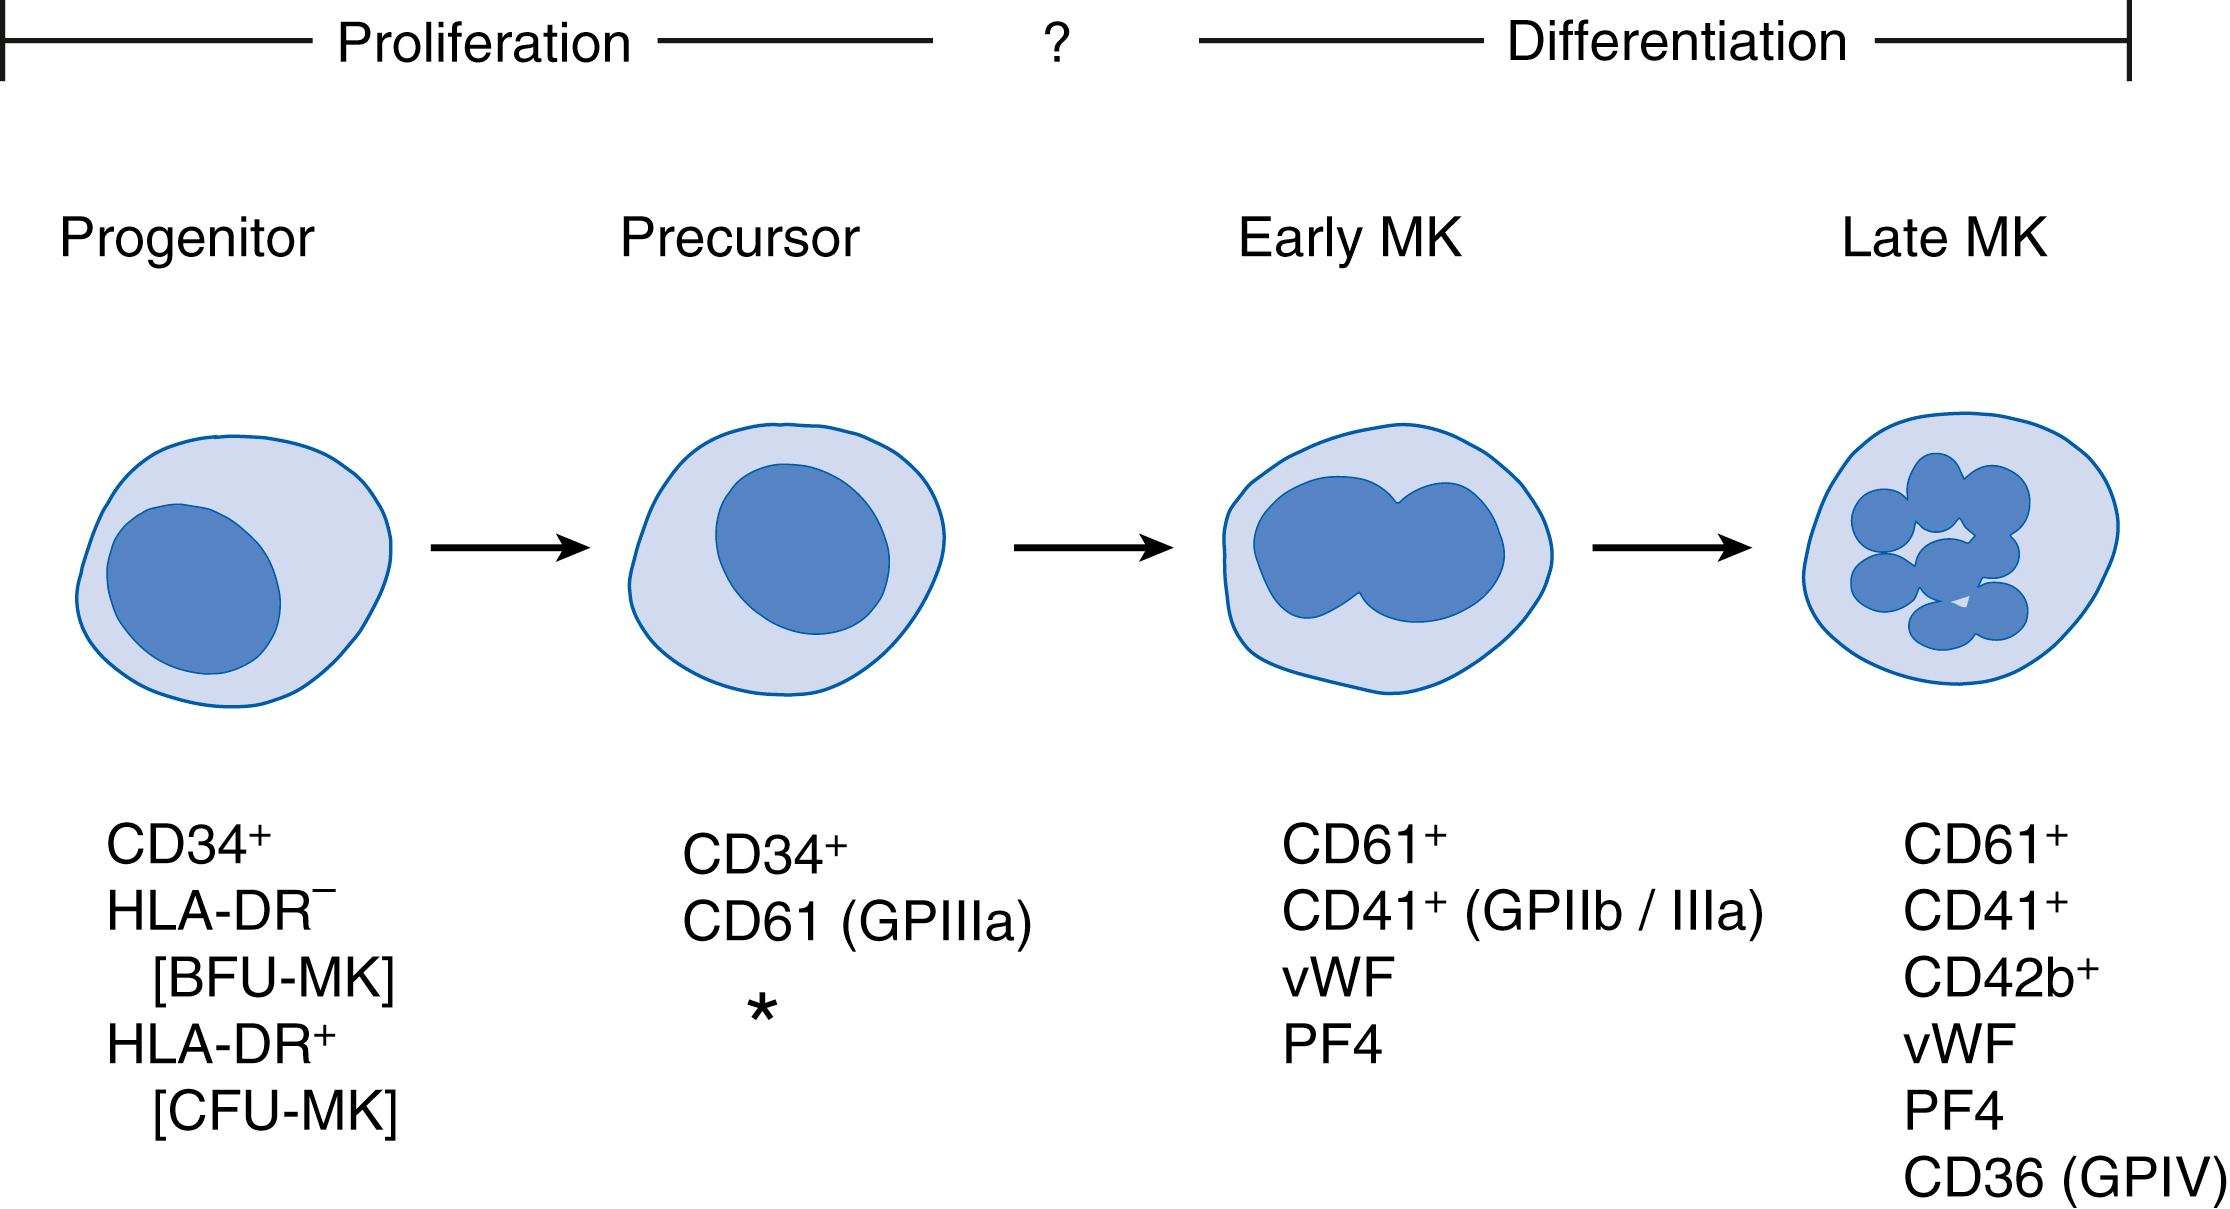 Fig. 110.2, Immunologic classification of megakaryocyte (MK) development. Burst-forming unit, MK (BFU-MK) , and colony-forming unit, MK (CFU-MK) , are considered progenitor cells. CFU-MK may transition into a precursor cell that still retains proliferative potential. Fragmentary data on various stages of MK differentiation suggest a chronologic appearance of specific platelet glycoproteins (GP) and other platelet antigens such as von Willebrand factor (vWf) and platelet factor 4 (PF4) . The asterisk indicates that MK antigens CD41 (GPIIb/IIIa) and CD41a (GPIIb) may be expressed on an earlier cell of the MK lineage that retains proliferative capacity. HLA-DR , Human leukocyte antigen-DR.